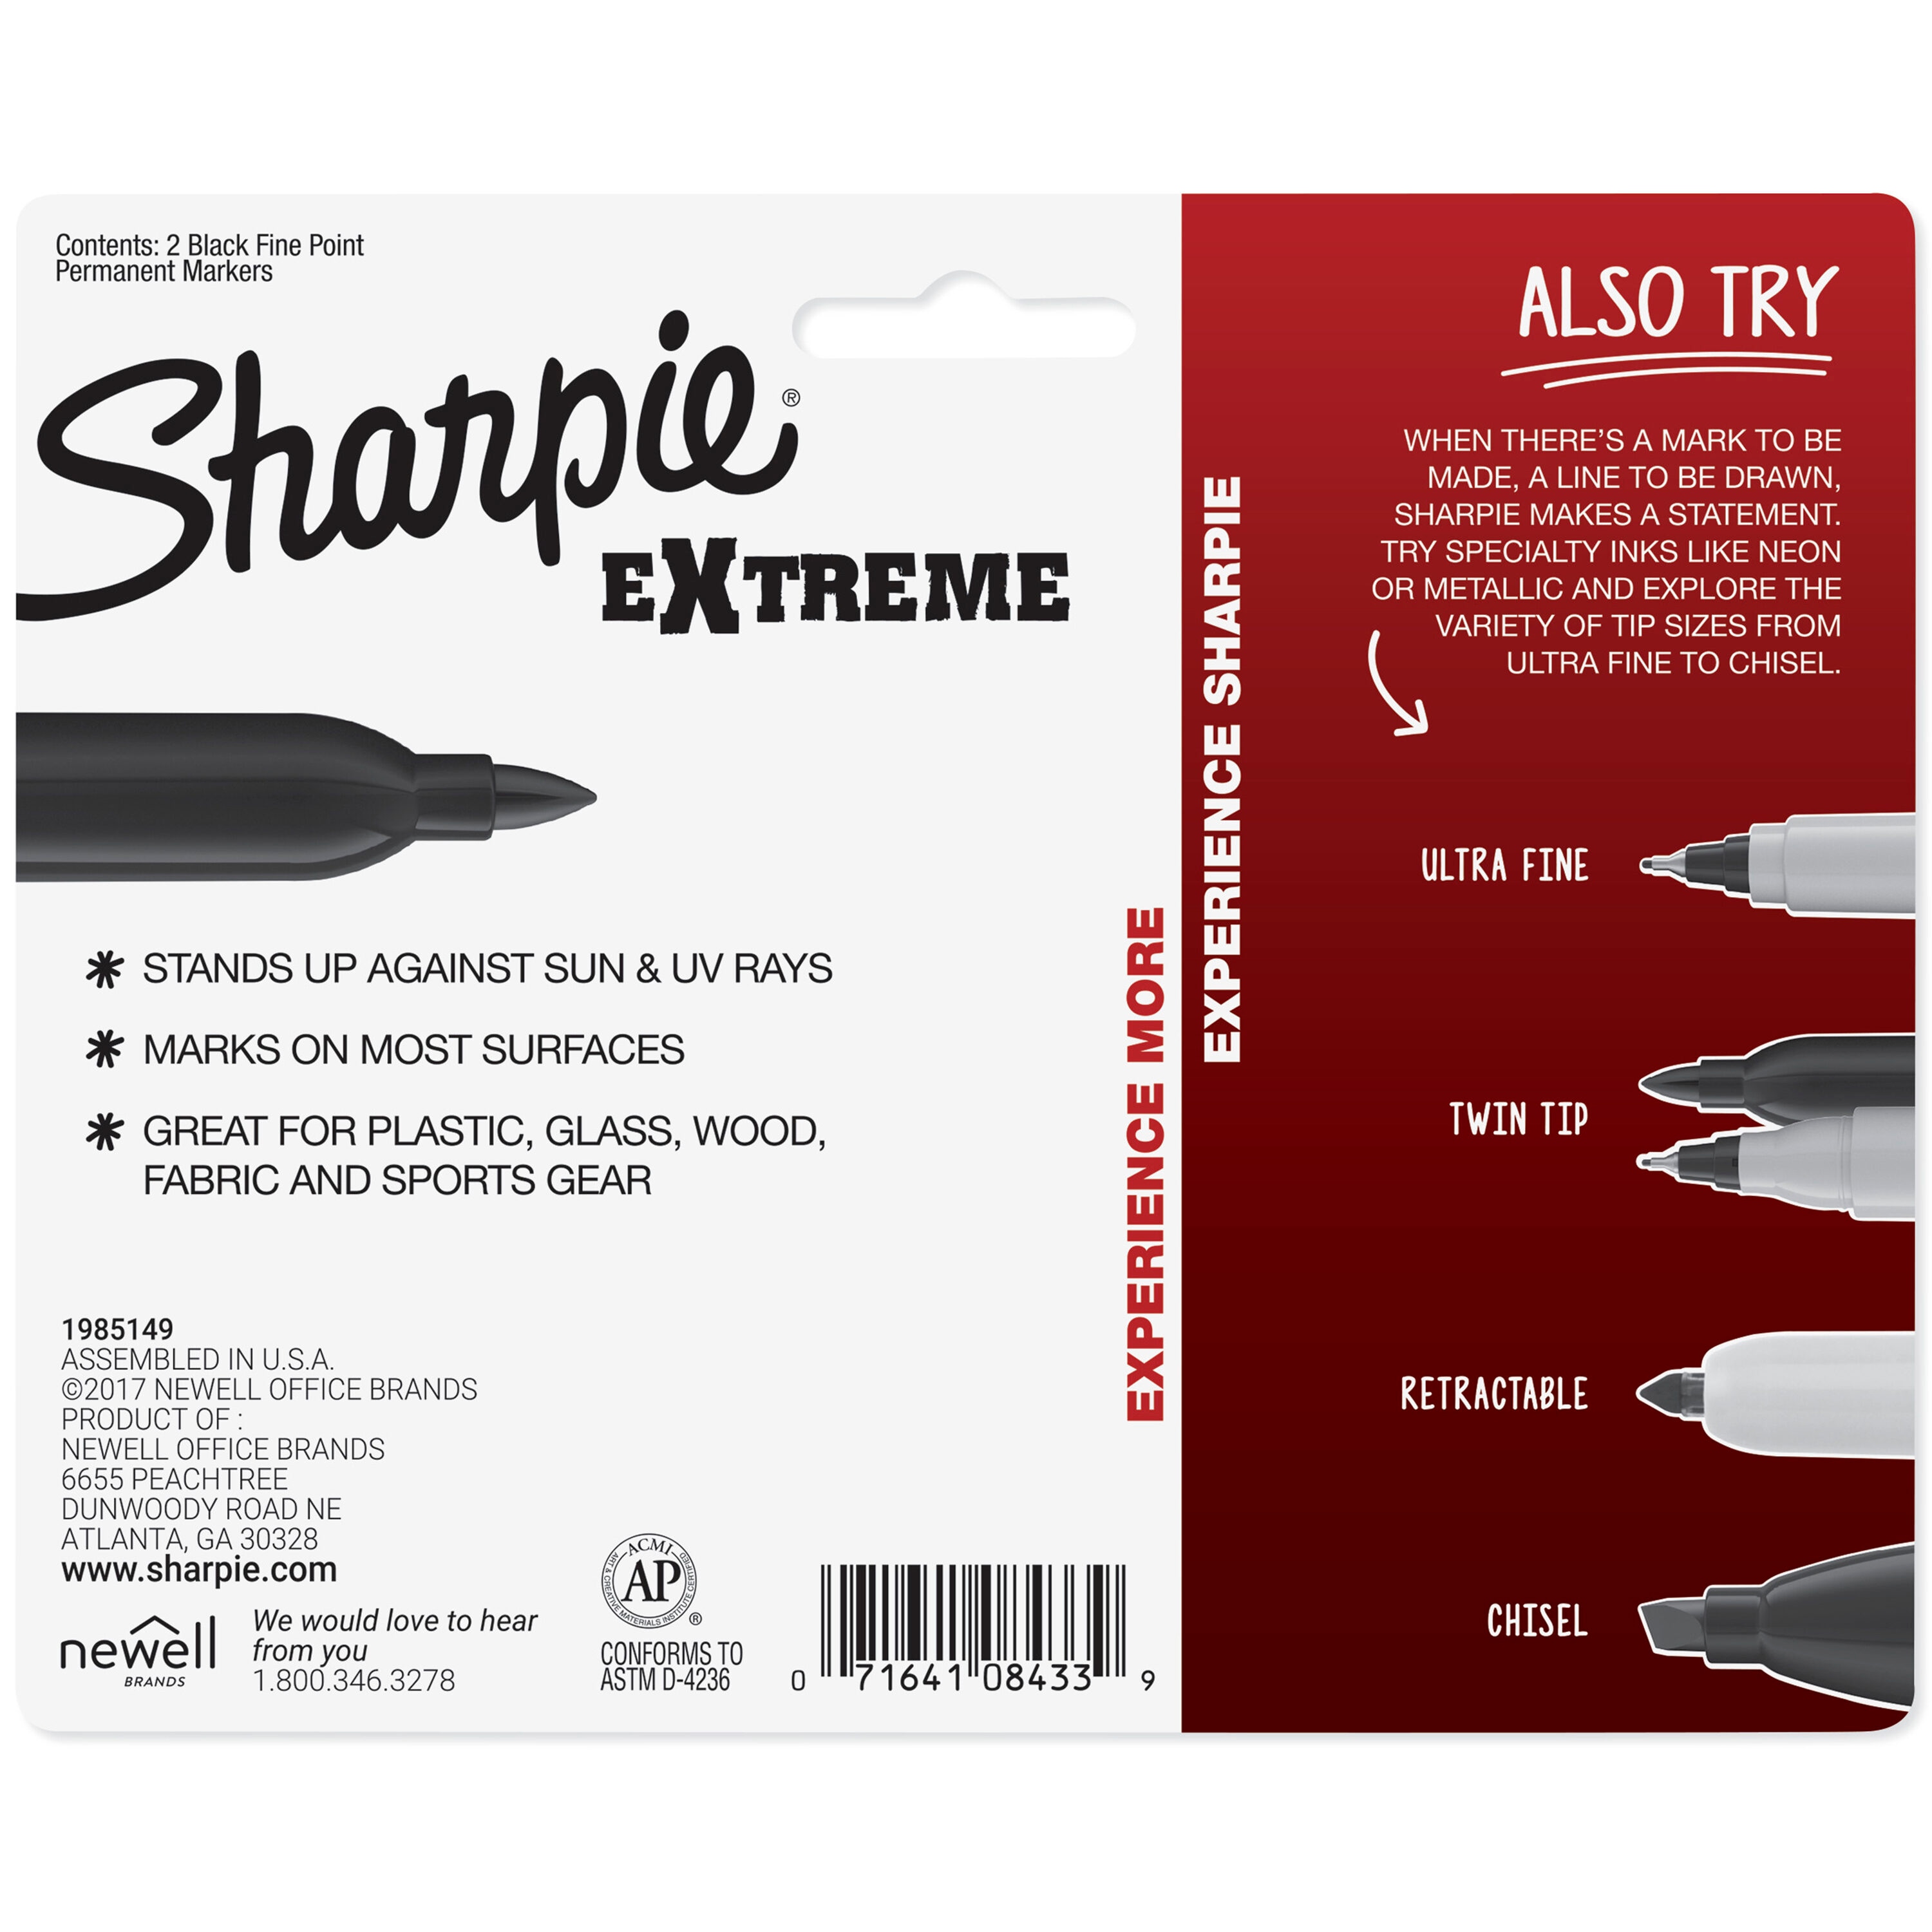 Sharpie Permanent Markers, Fine Point, Black Ink (4-Pack)